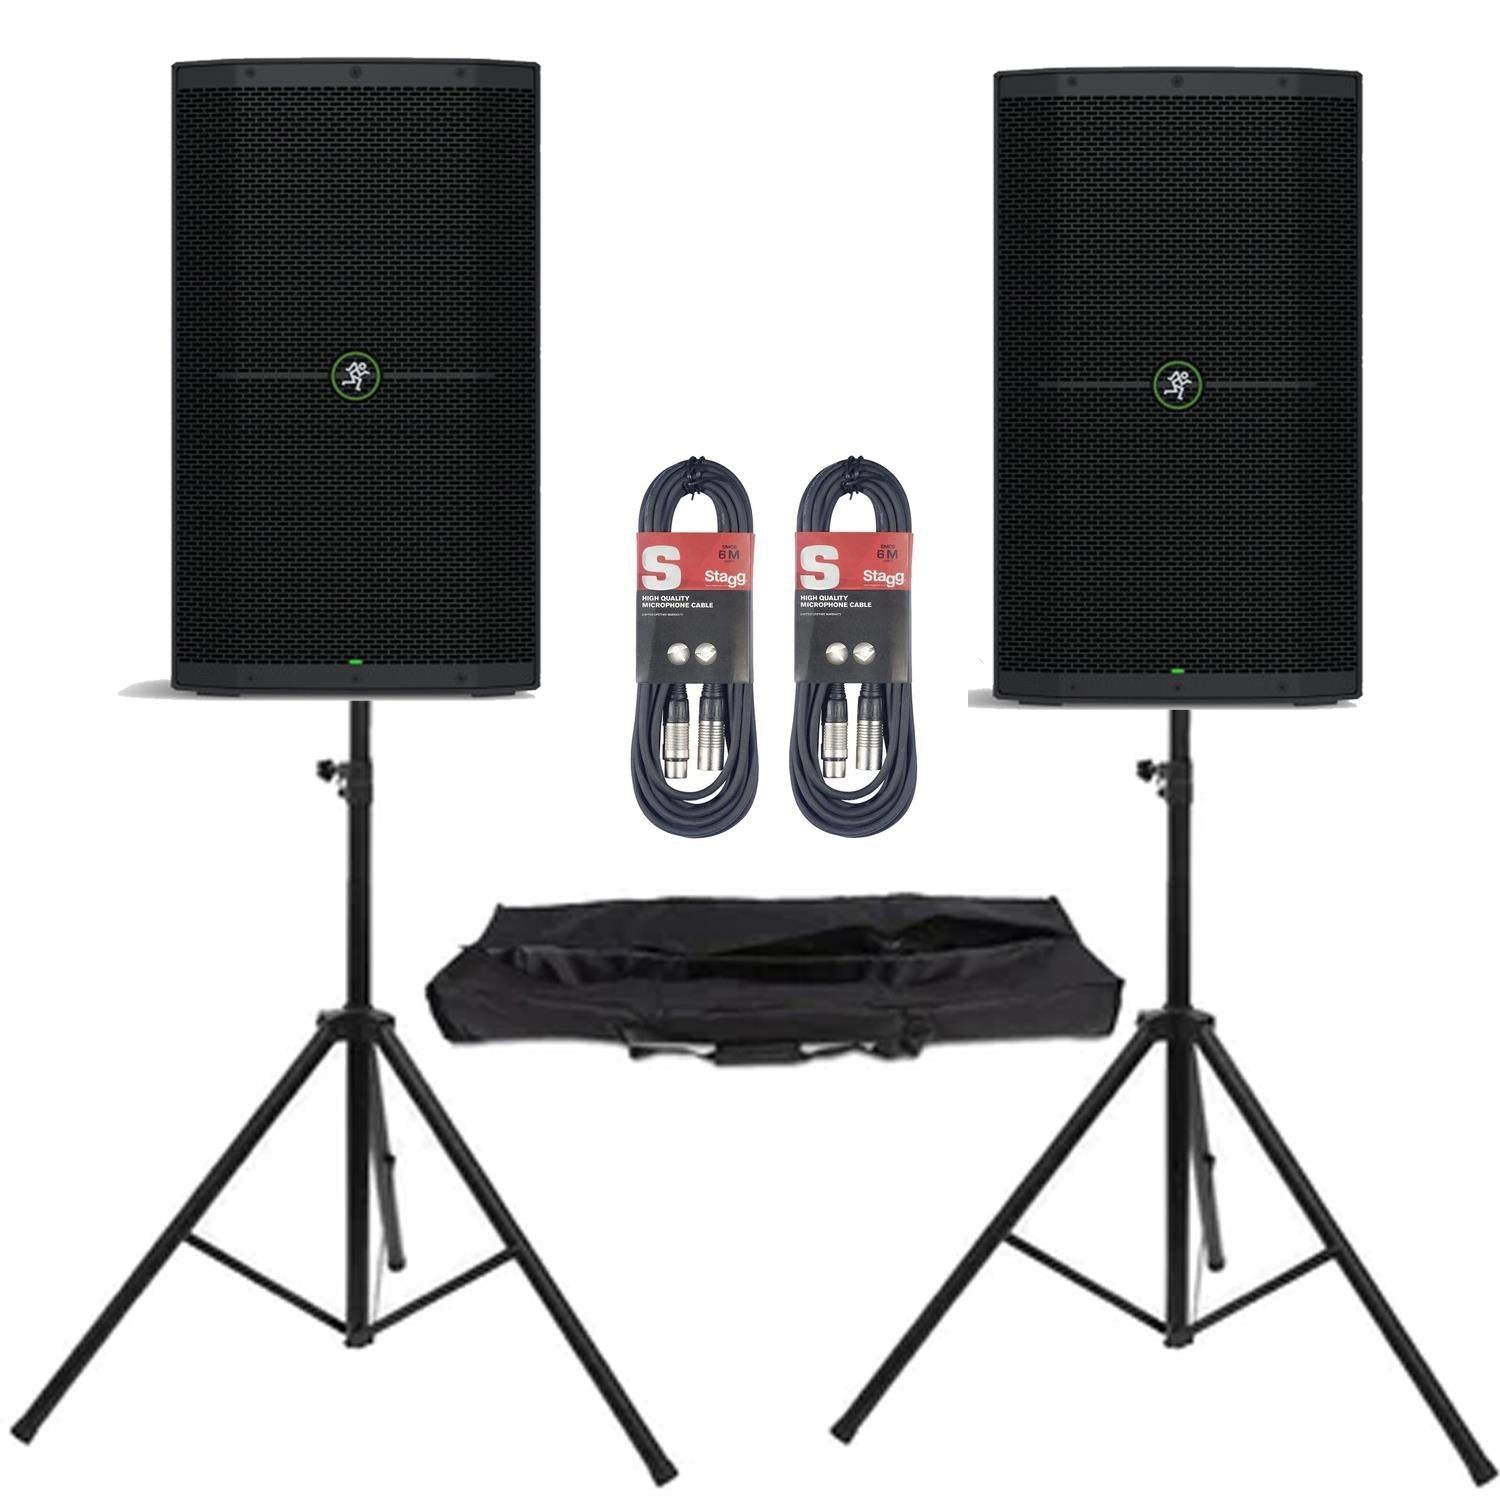 2 x Mackie Thump 212 Active Speaker With Stands & Cables Bundle - DY Pro Audio